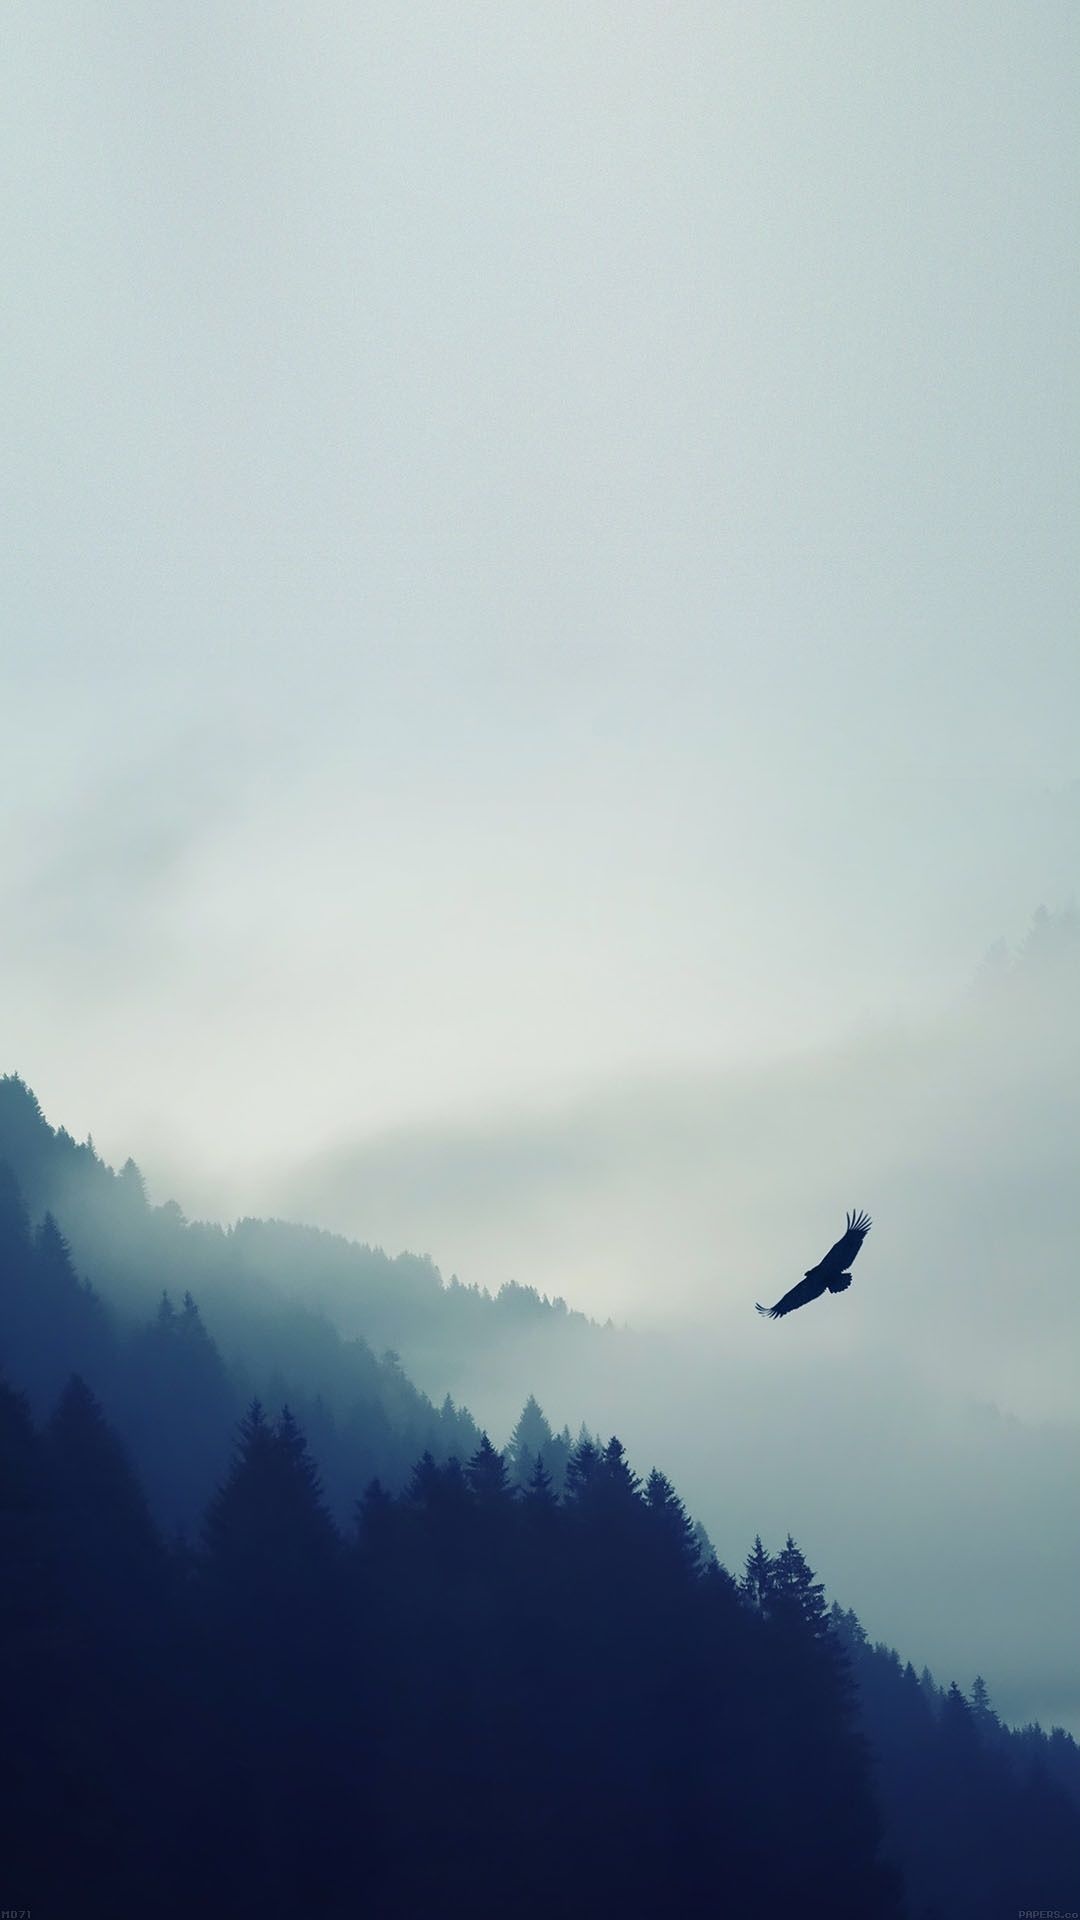 Bird-Flying-Over-Foggy-Forest-iPhone-6-Plus-HD-Wallpaper.